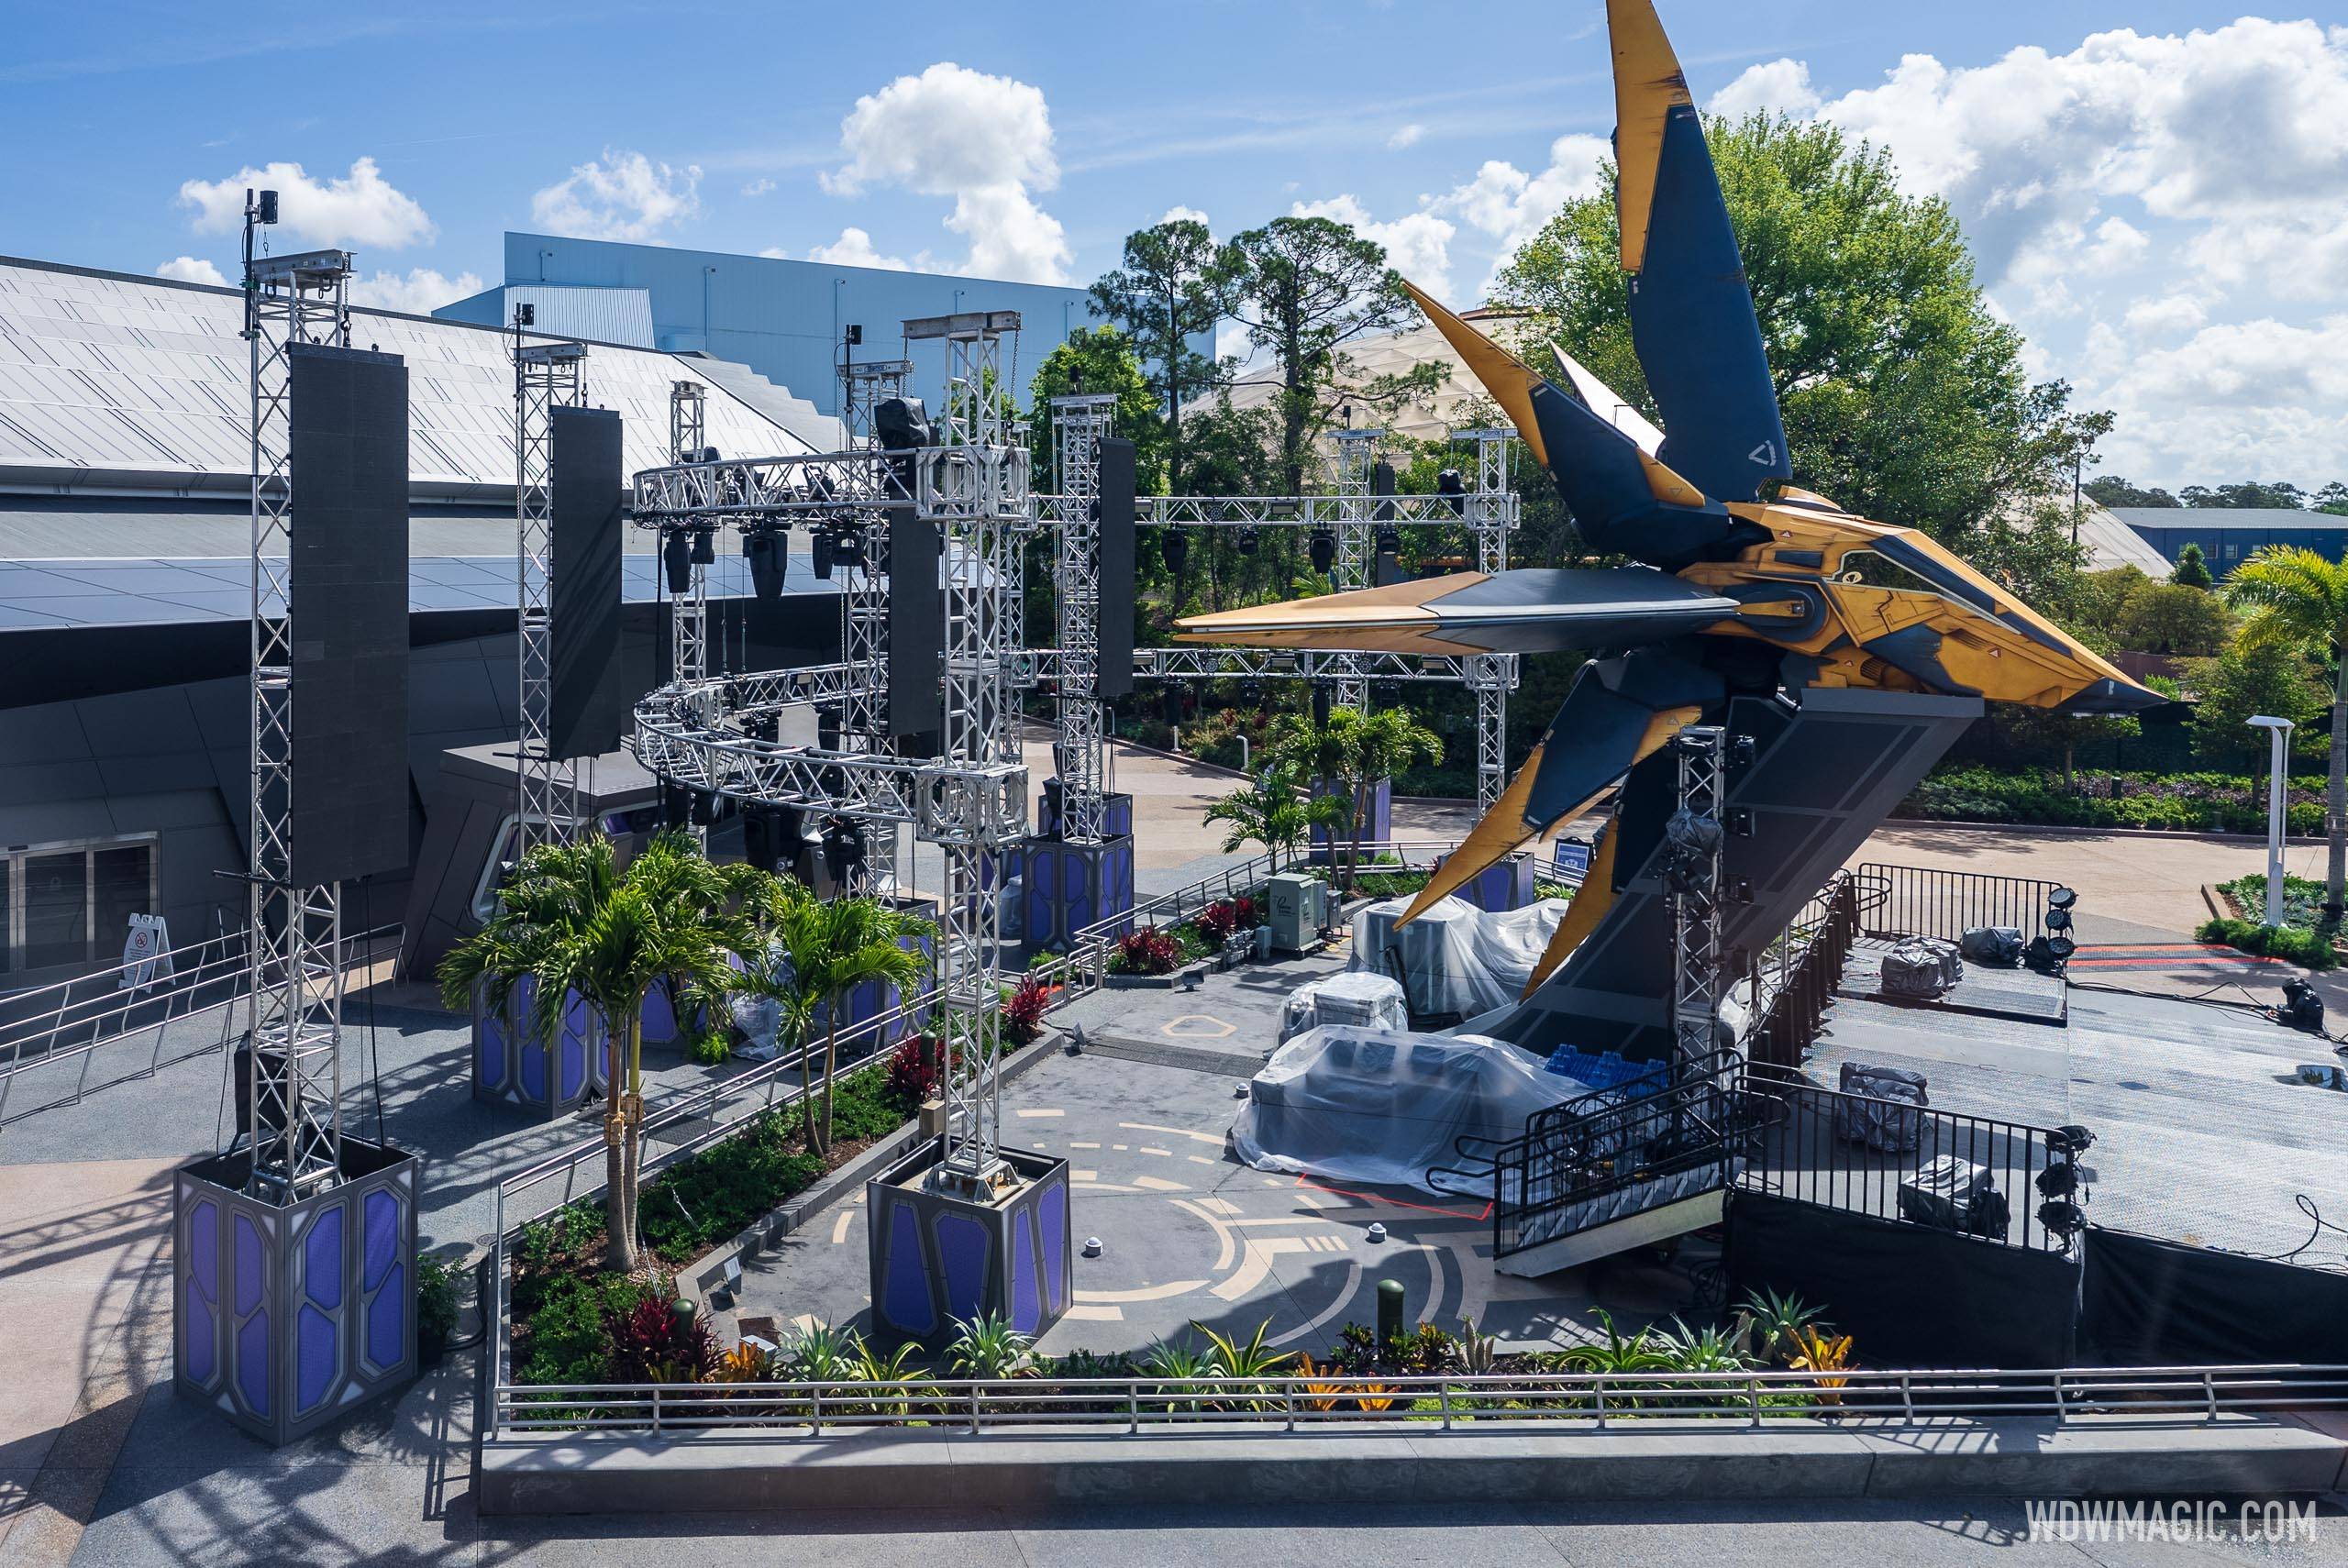 Elaborate stage setup for dedication ceremony of EPCOT's Guardians of the Galaxy Cosmic Rewind